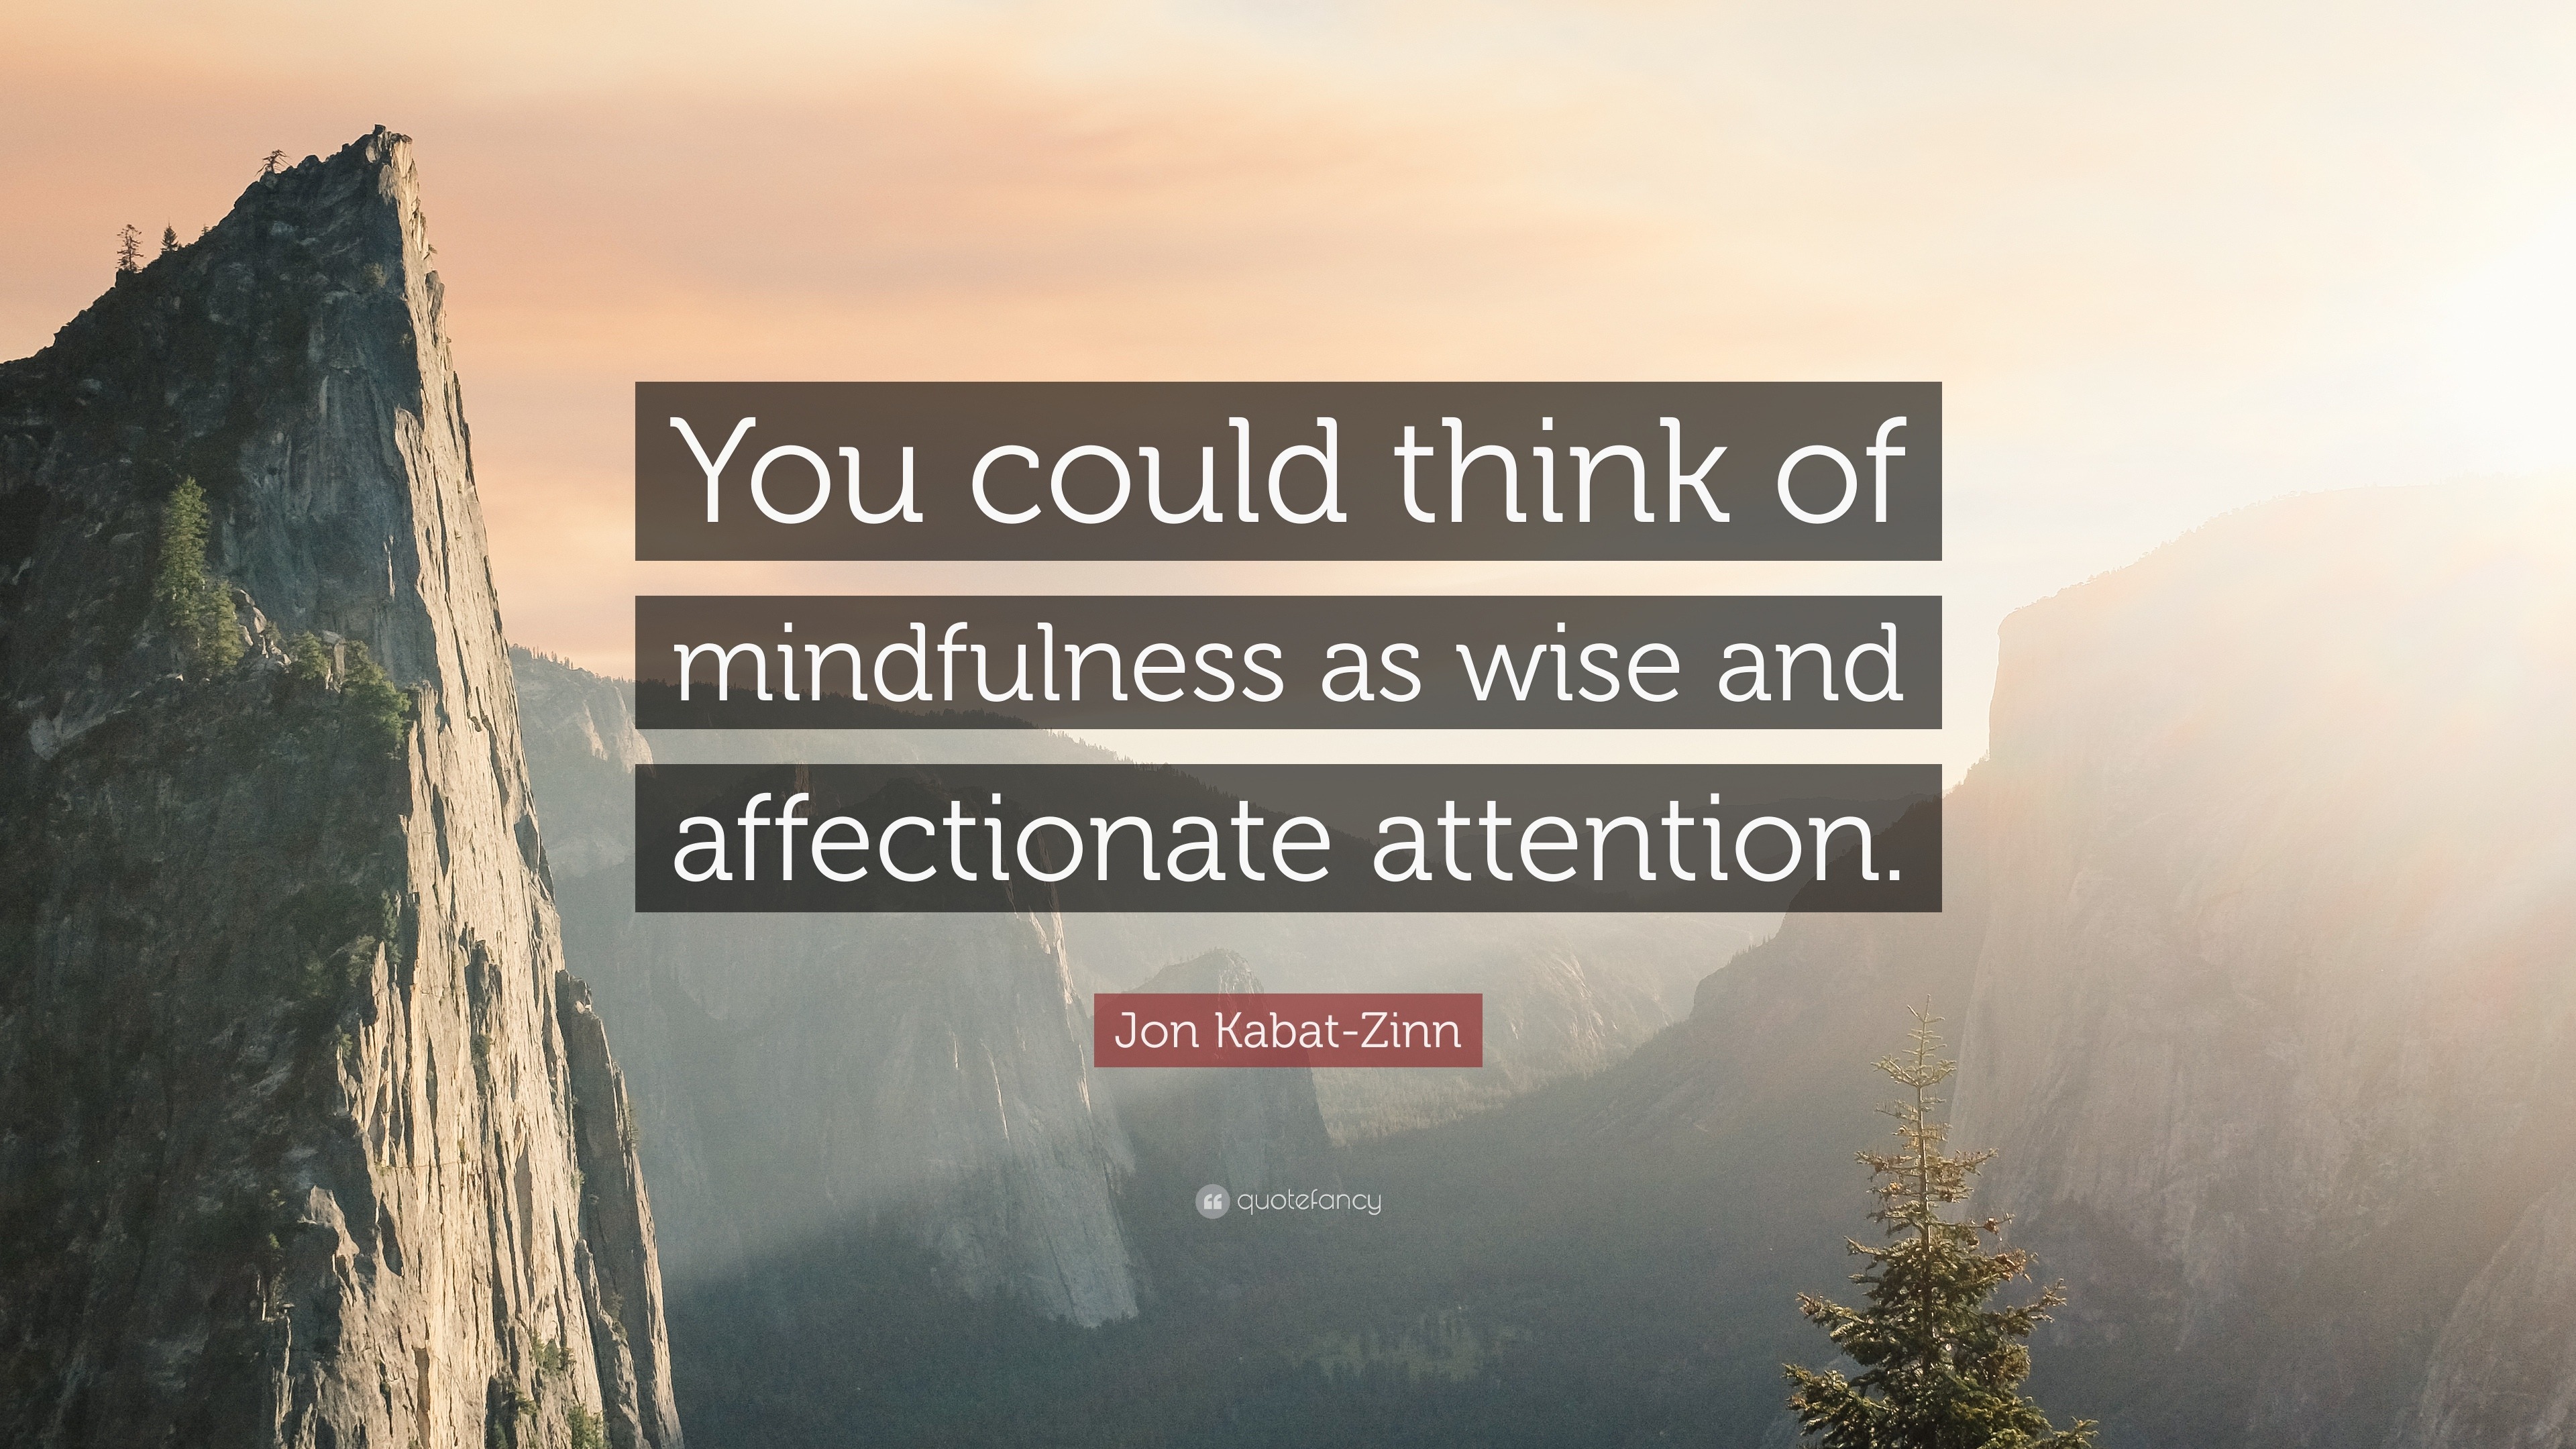 Jon Kabat-Zinn Quote: “You could think of mindfulness as wise and ...